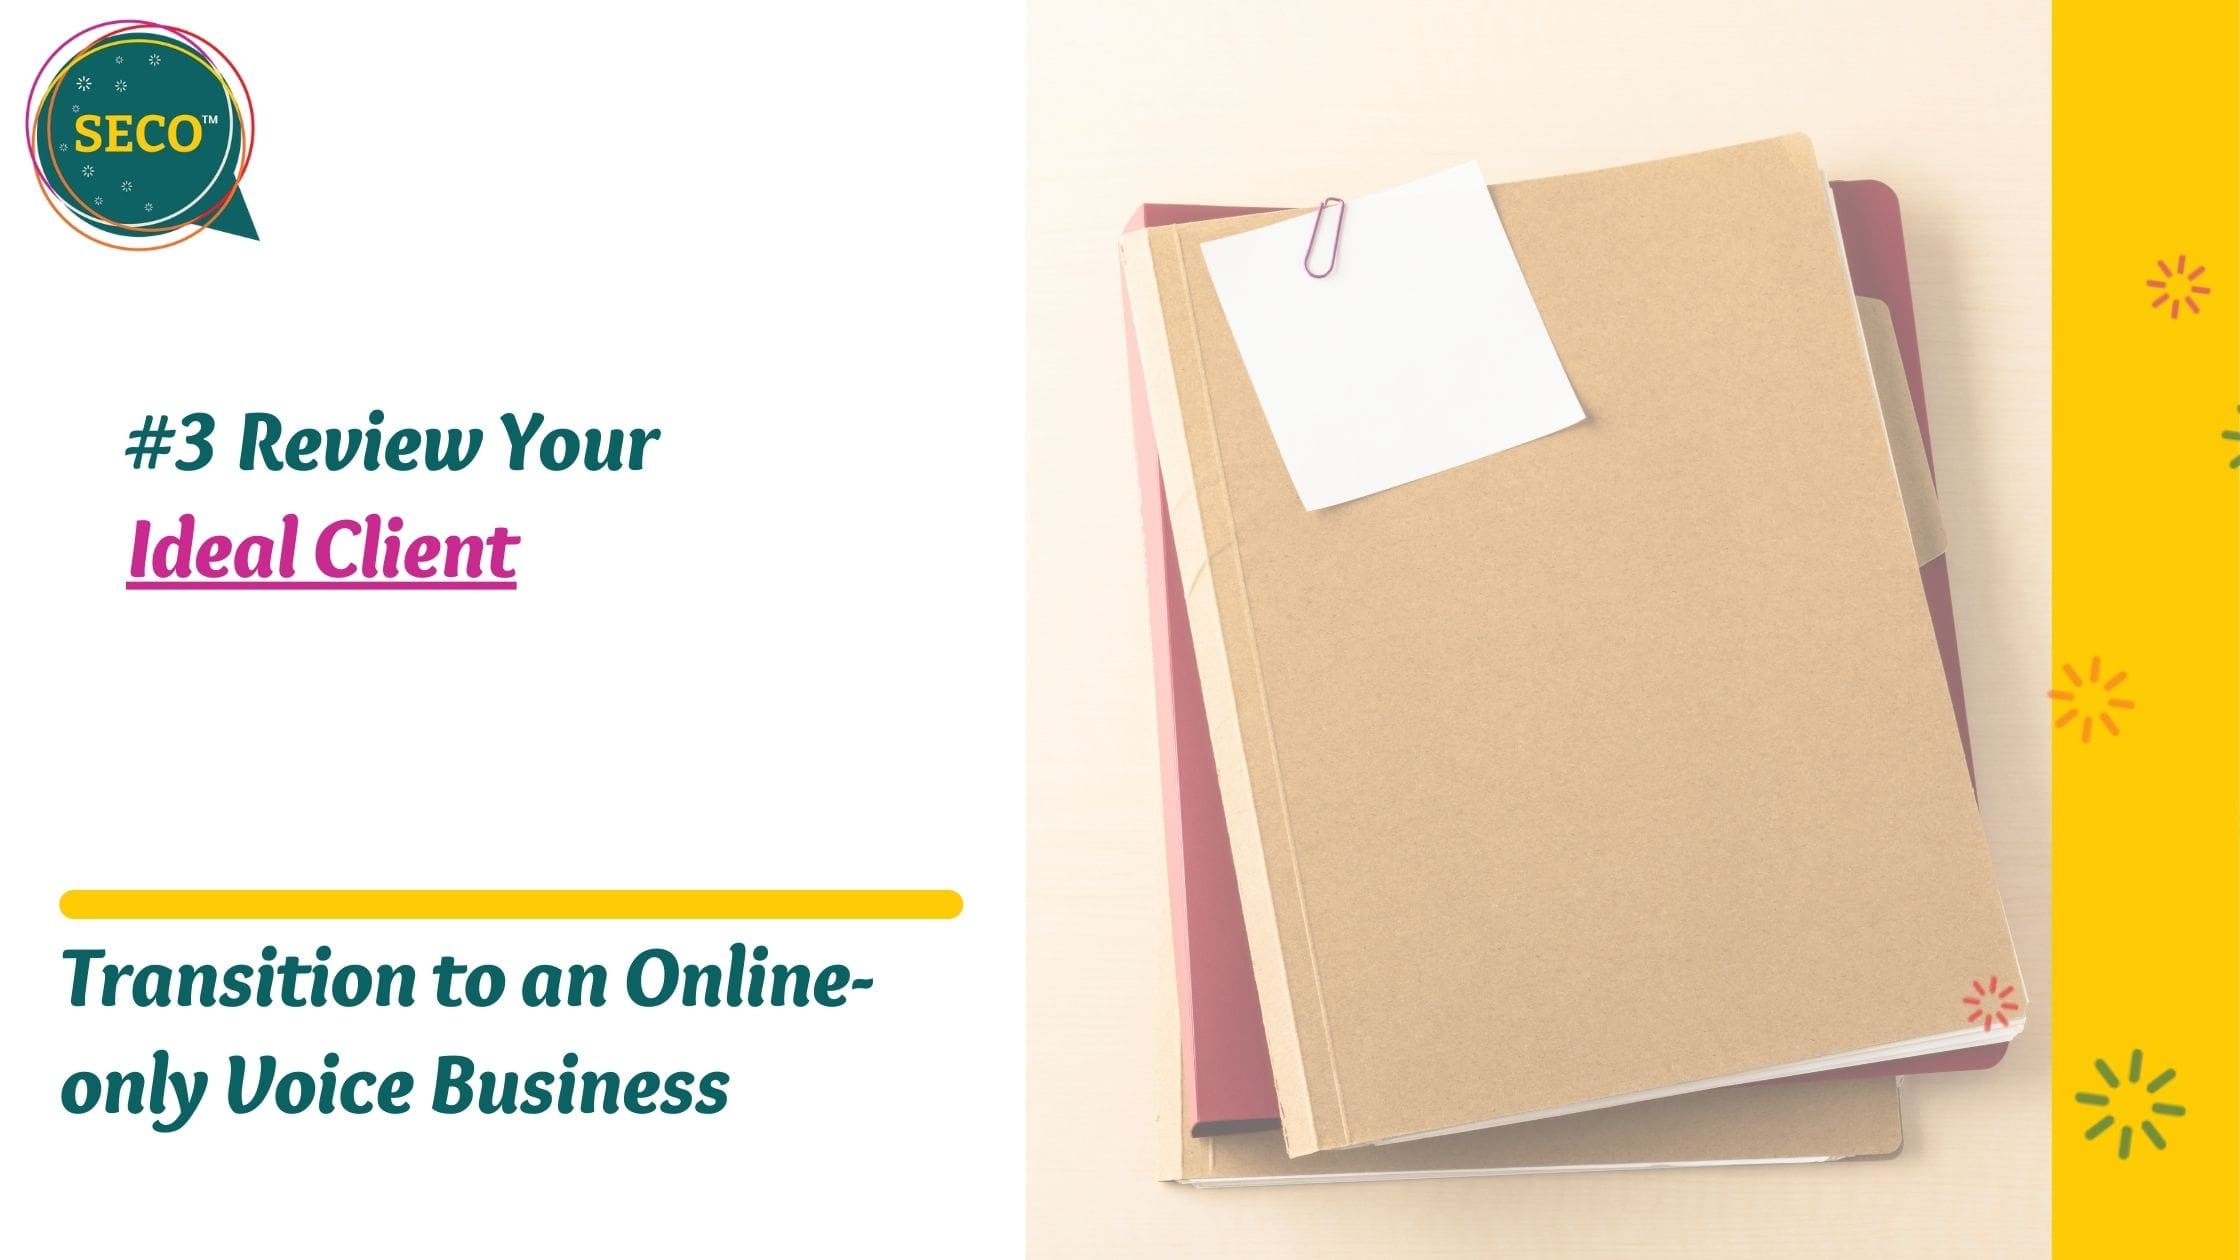 How to Transition to an Online-only Voice Business: Step #3 Review Your Ideal Client.